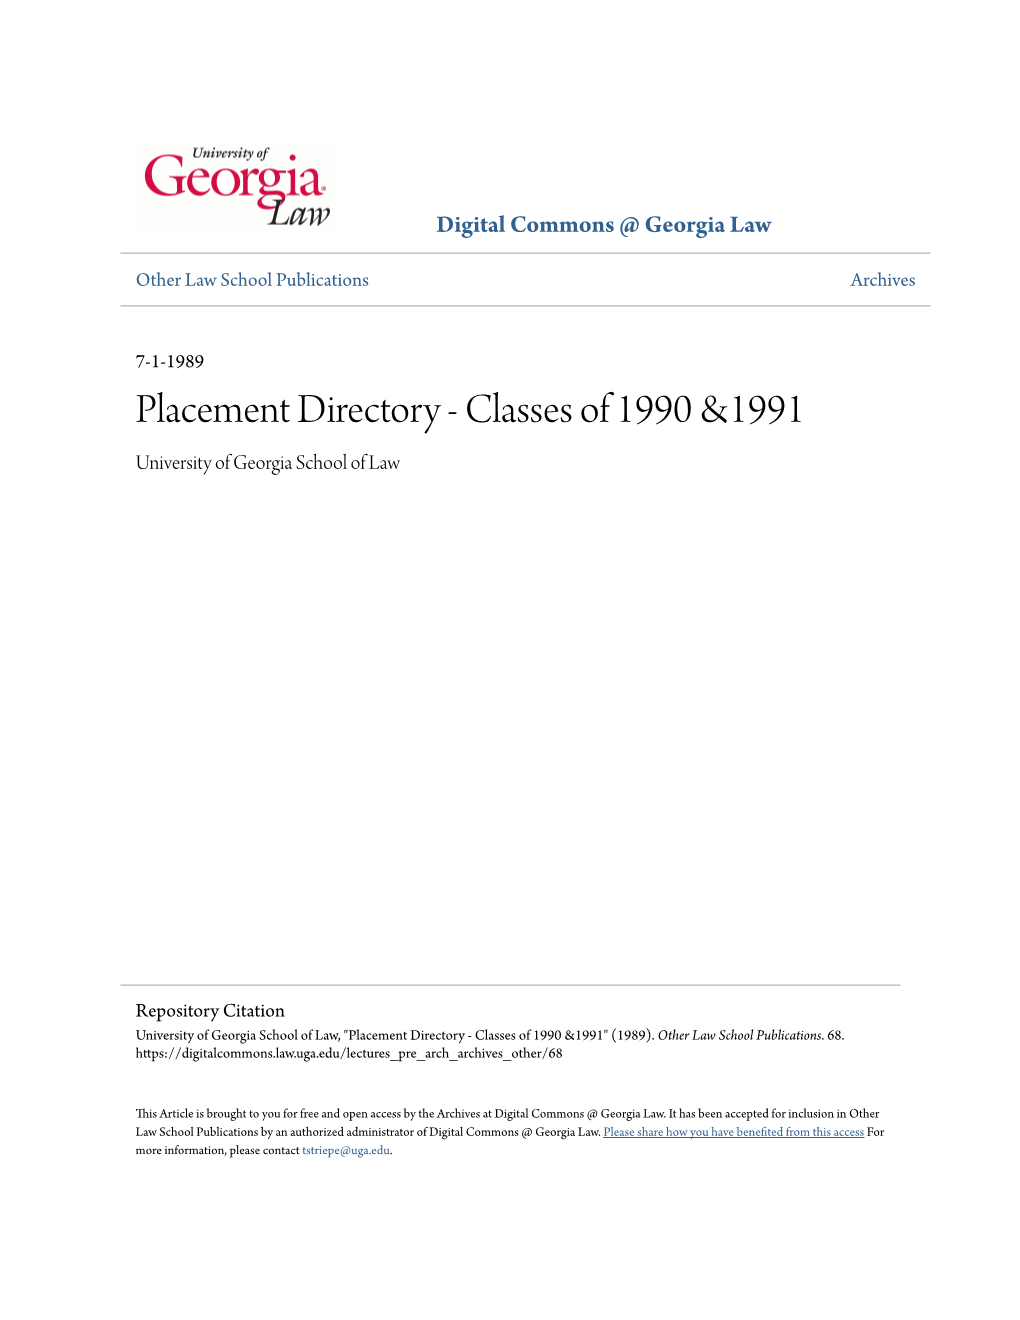 Placement Directory - Classes of 1990 &1991 University of Georgia School of Law